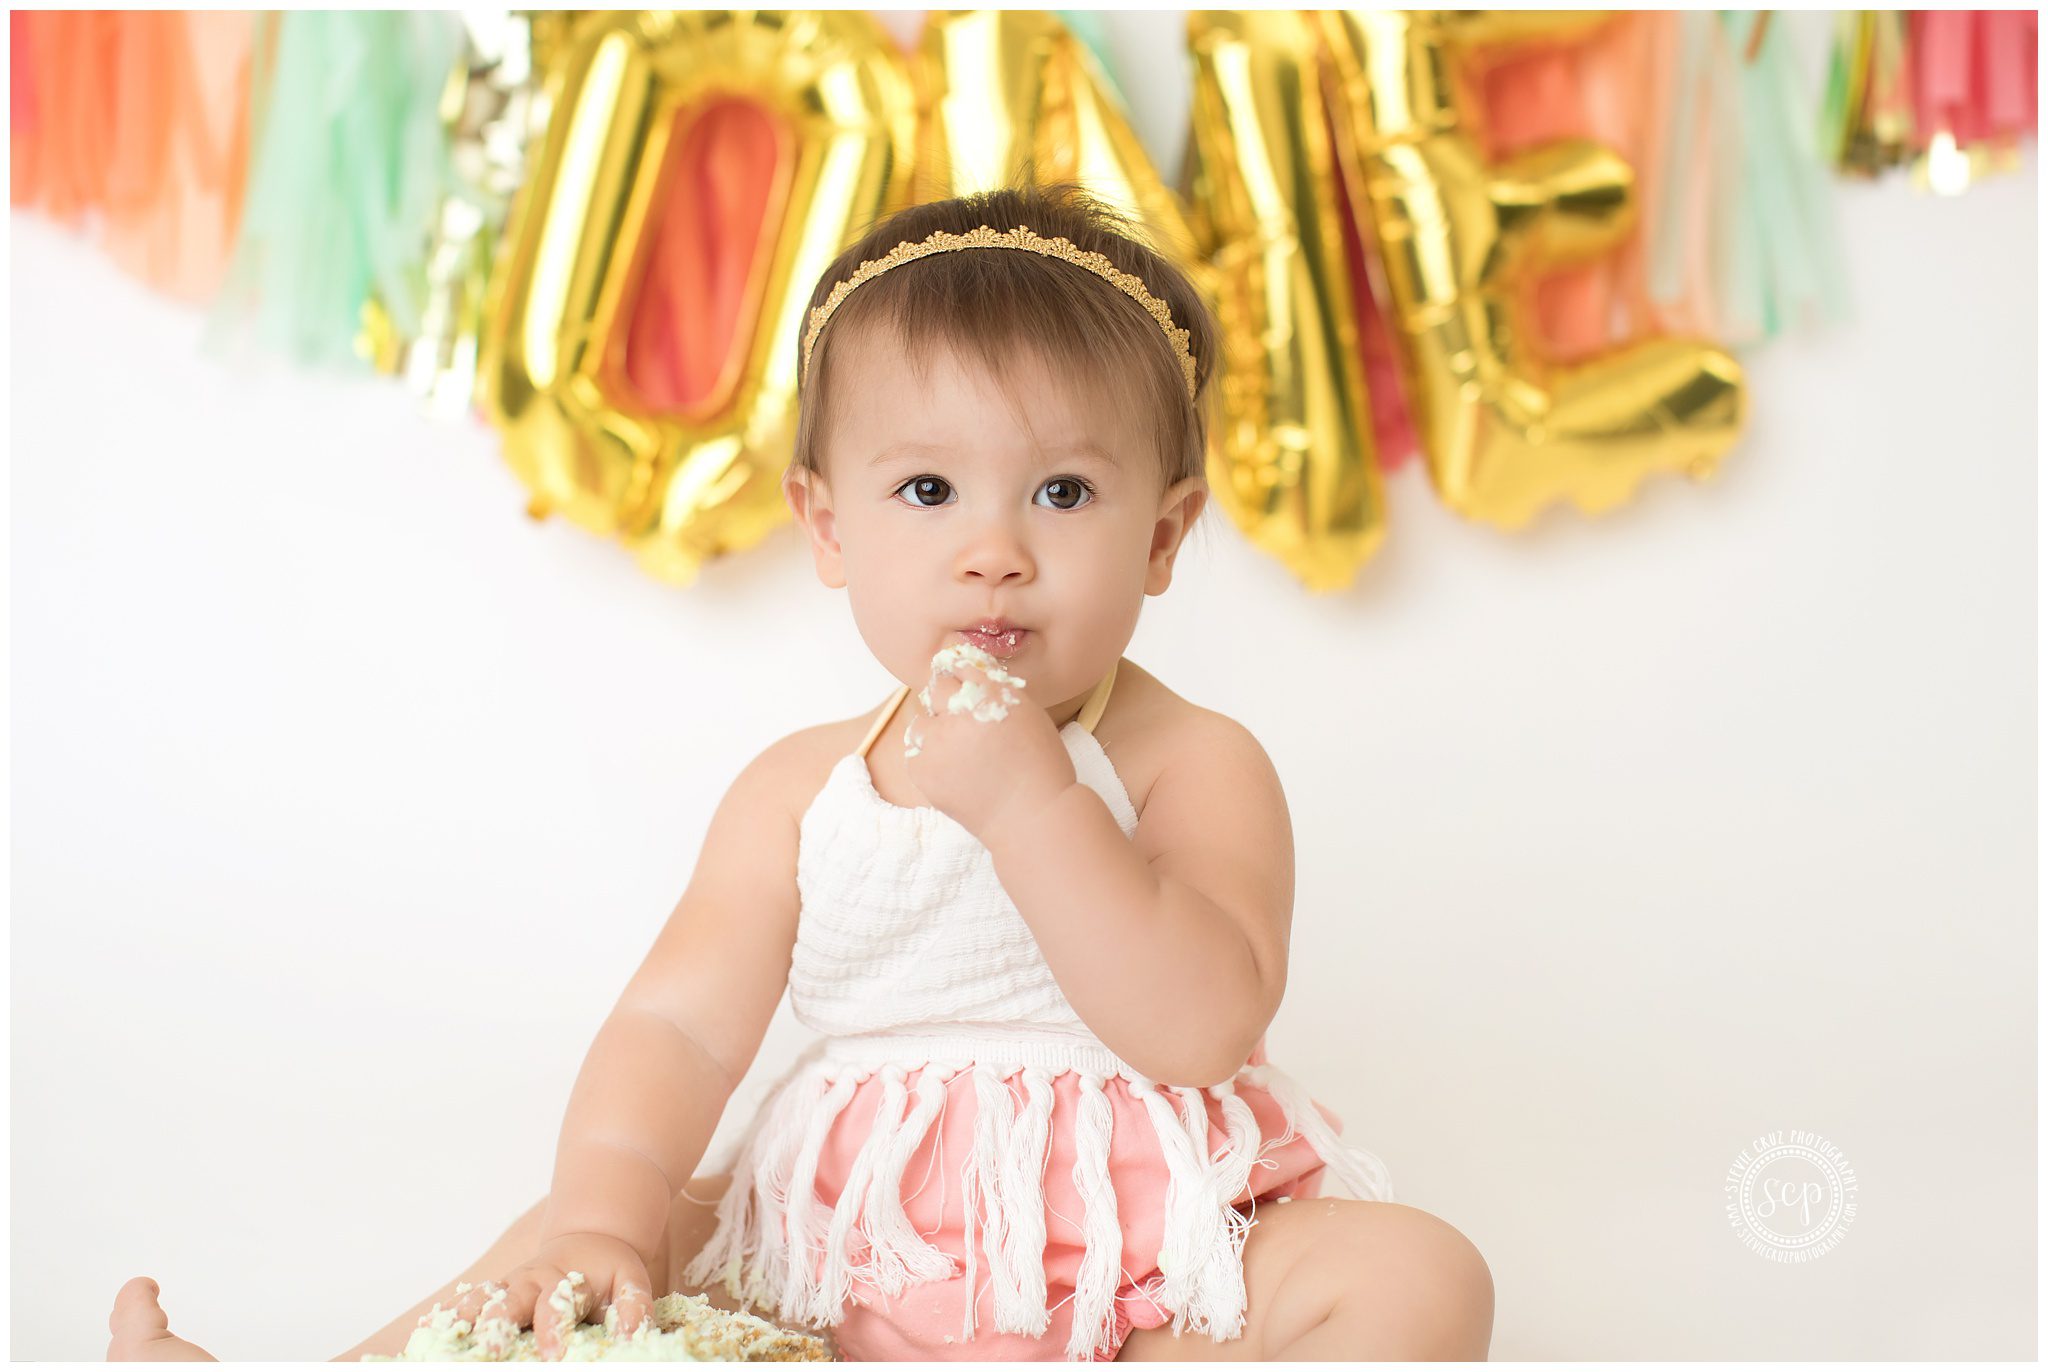 Baby portraits of cake smash photo session. Ideas and inspirit for girls